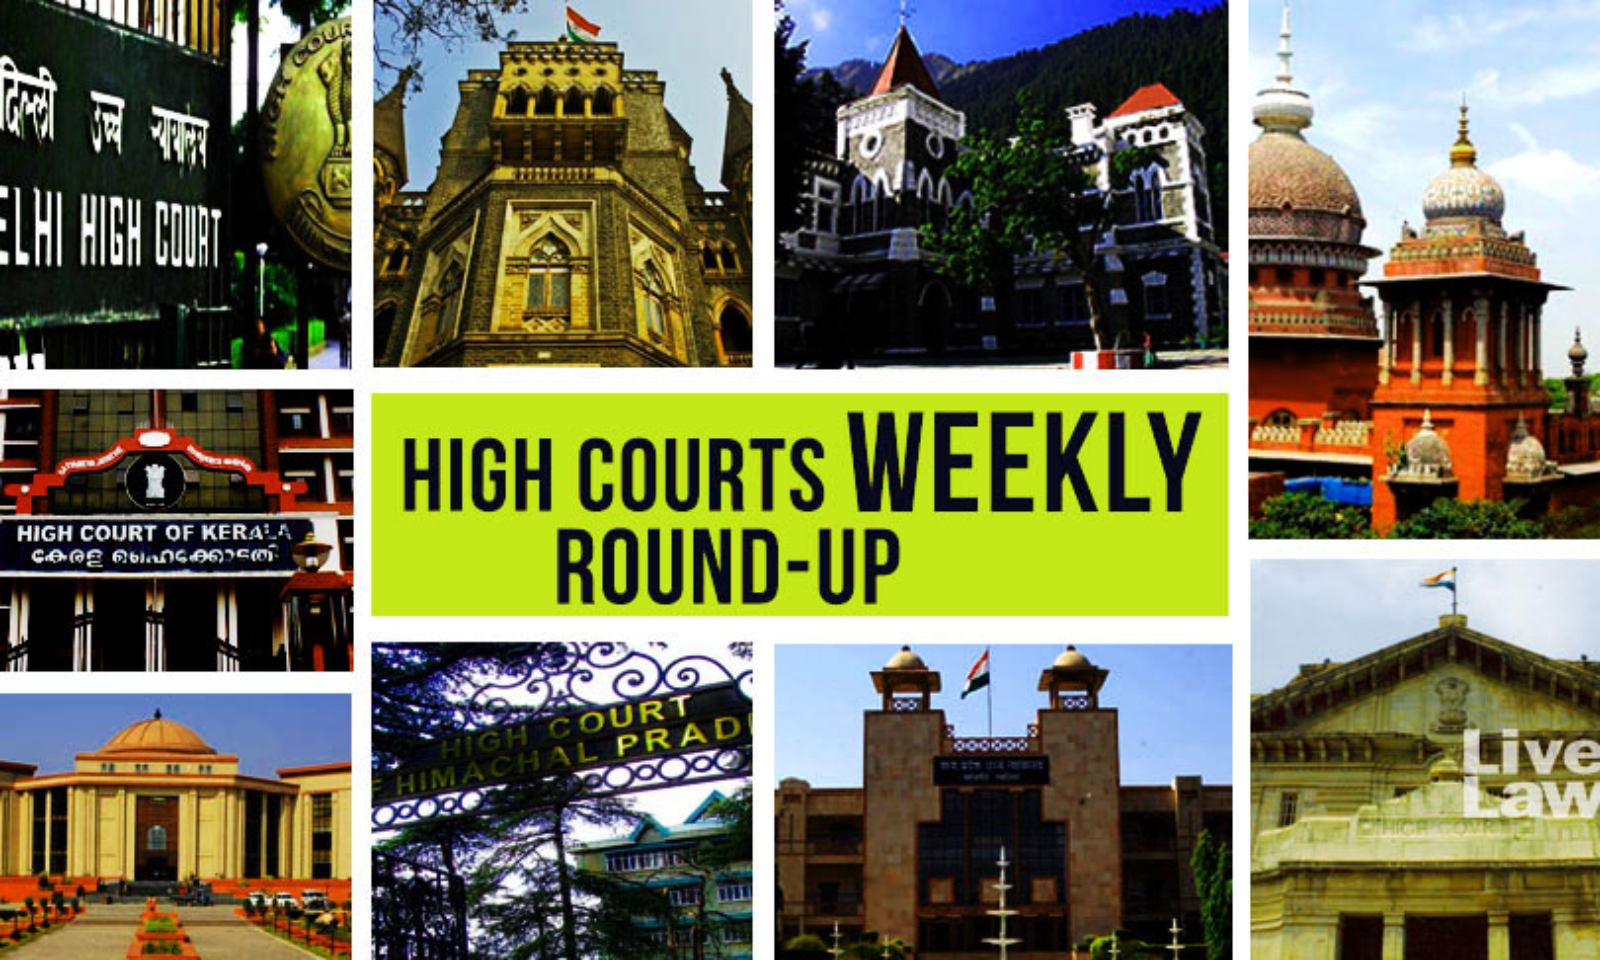 Www Xxx Sex Kashmir His School Sex - All High Courts Weekly Roundup [March 28- April 03, 2022]